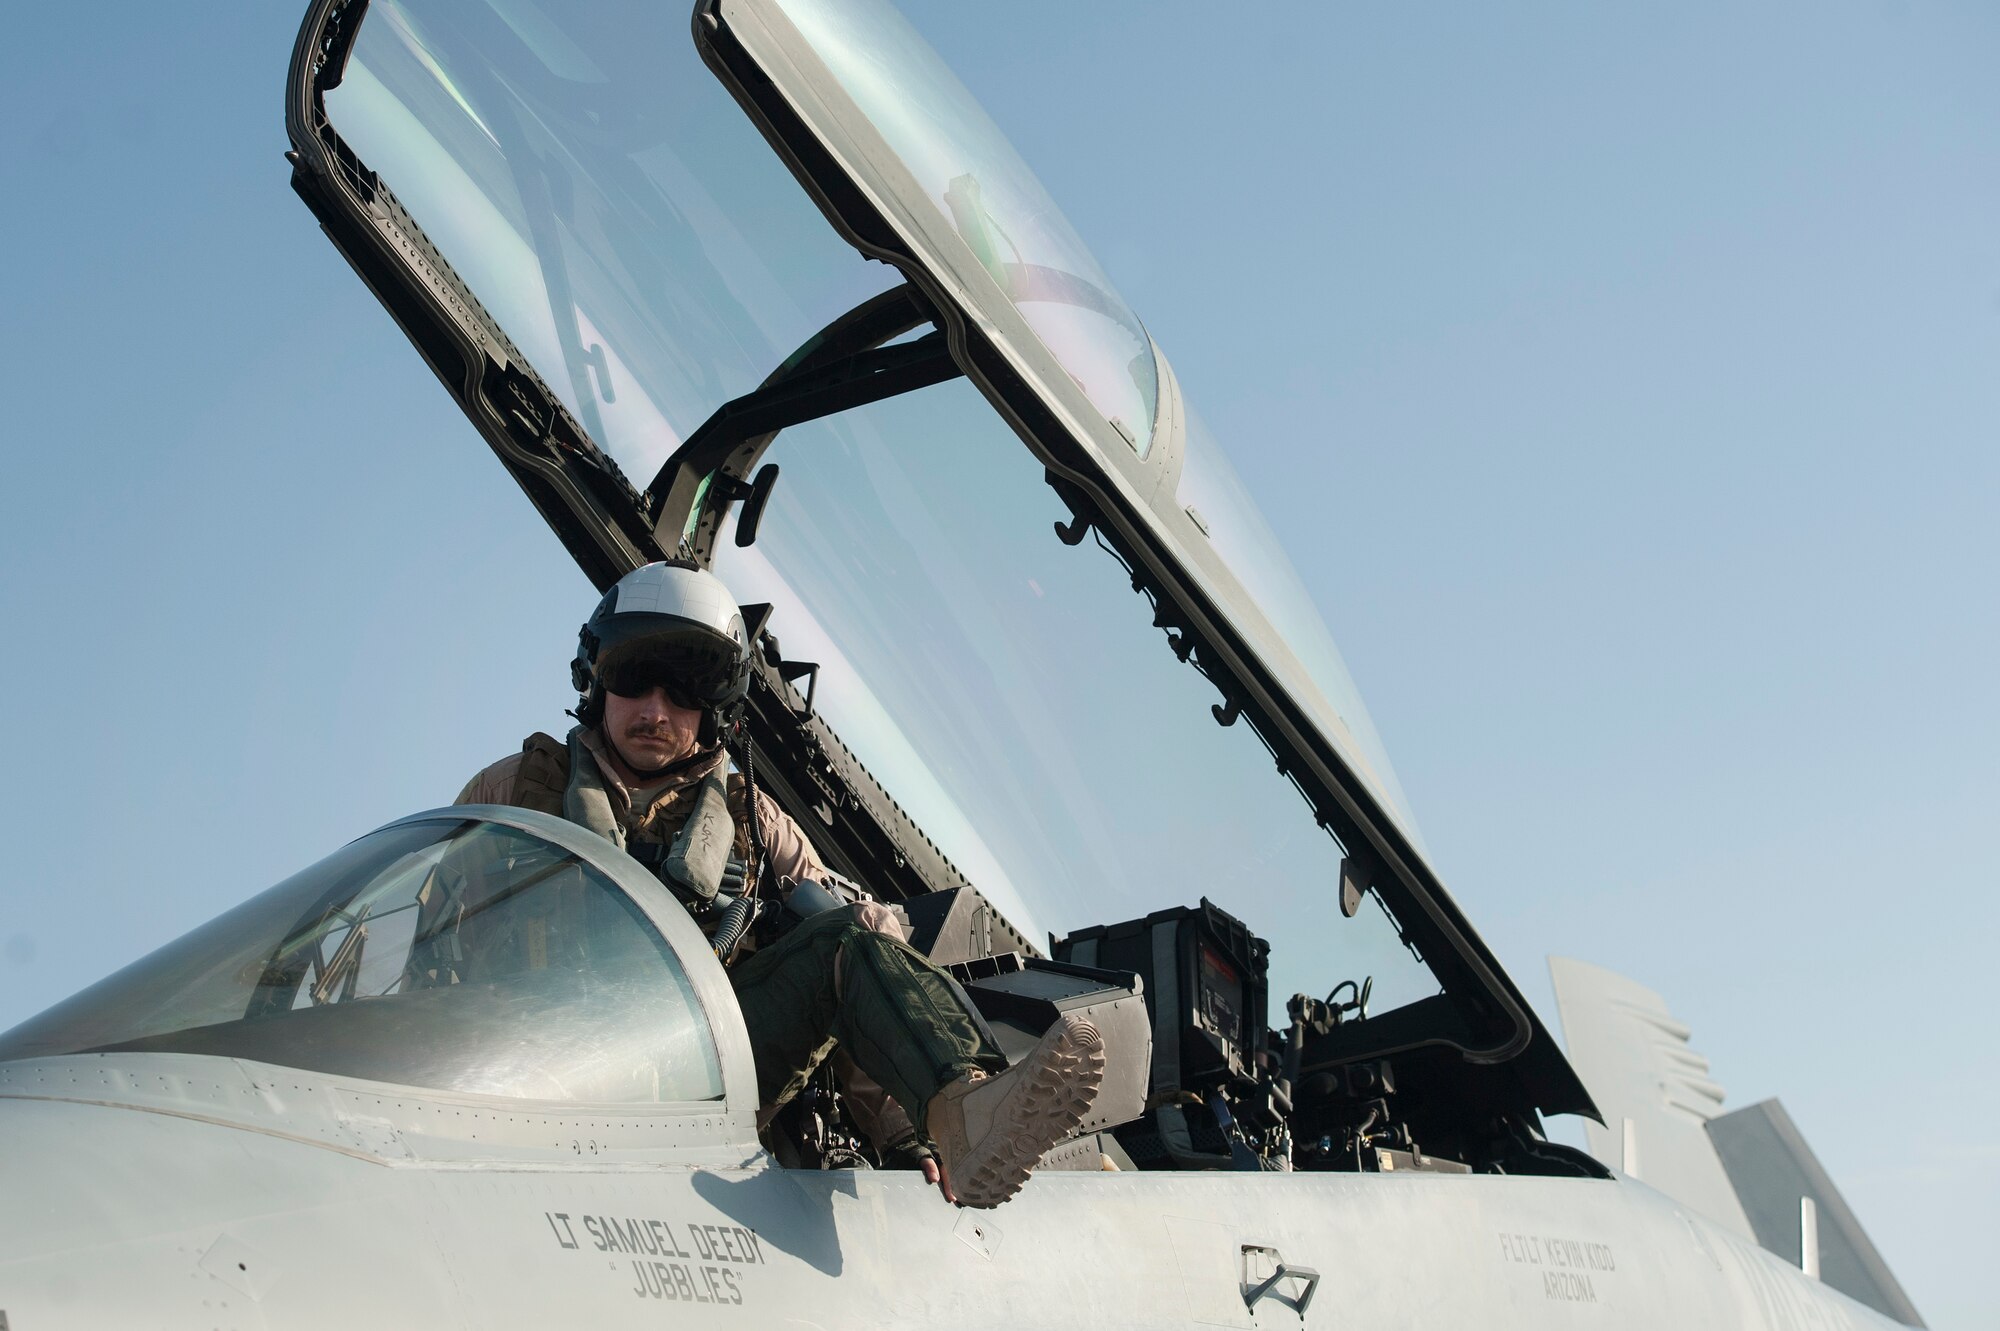 U.S. Air Force 1st Lt. Jonathan Wright, 390th Electronic Combat Squadron and Electronic Attack Squadron 135 (VAQ-135) “Black Ravens” EA-18G Growler pilot, exits the cockpit after completing his first combat flight Nov. 19, 2018, at Al Udeid Air Base, Qatar. Wright is the first Air Force pilot to operate a Growler on a combat mission. VAQ-135 is deployed to the U.S. 5th Fleet area of operations in support of naval operations to ensure maritime stability and security in the Central Region, connecting the Mediterranean and the Pacific through the western Indian Ocean and three strategic choke points. (U.S. Air Force photo by Tech. Sgt. Christopher Hubenthal)